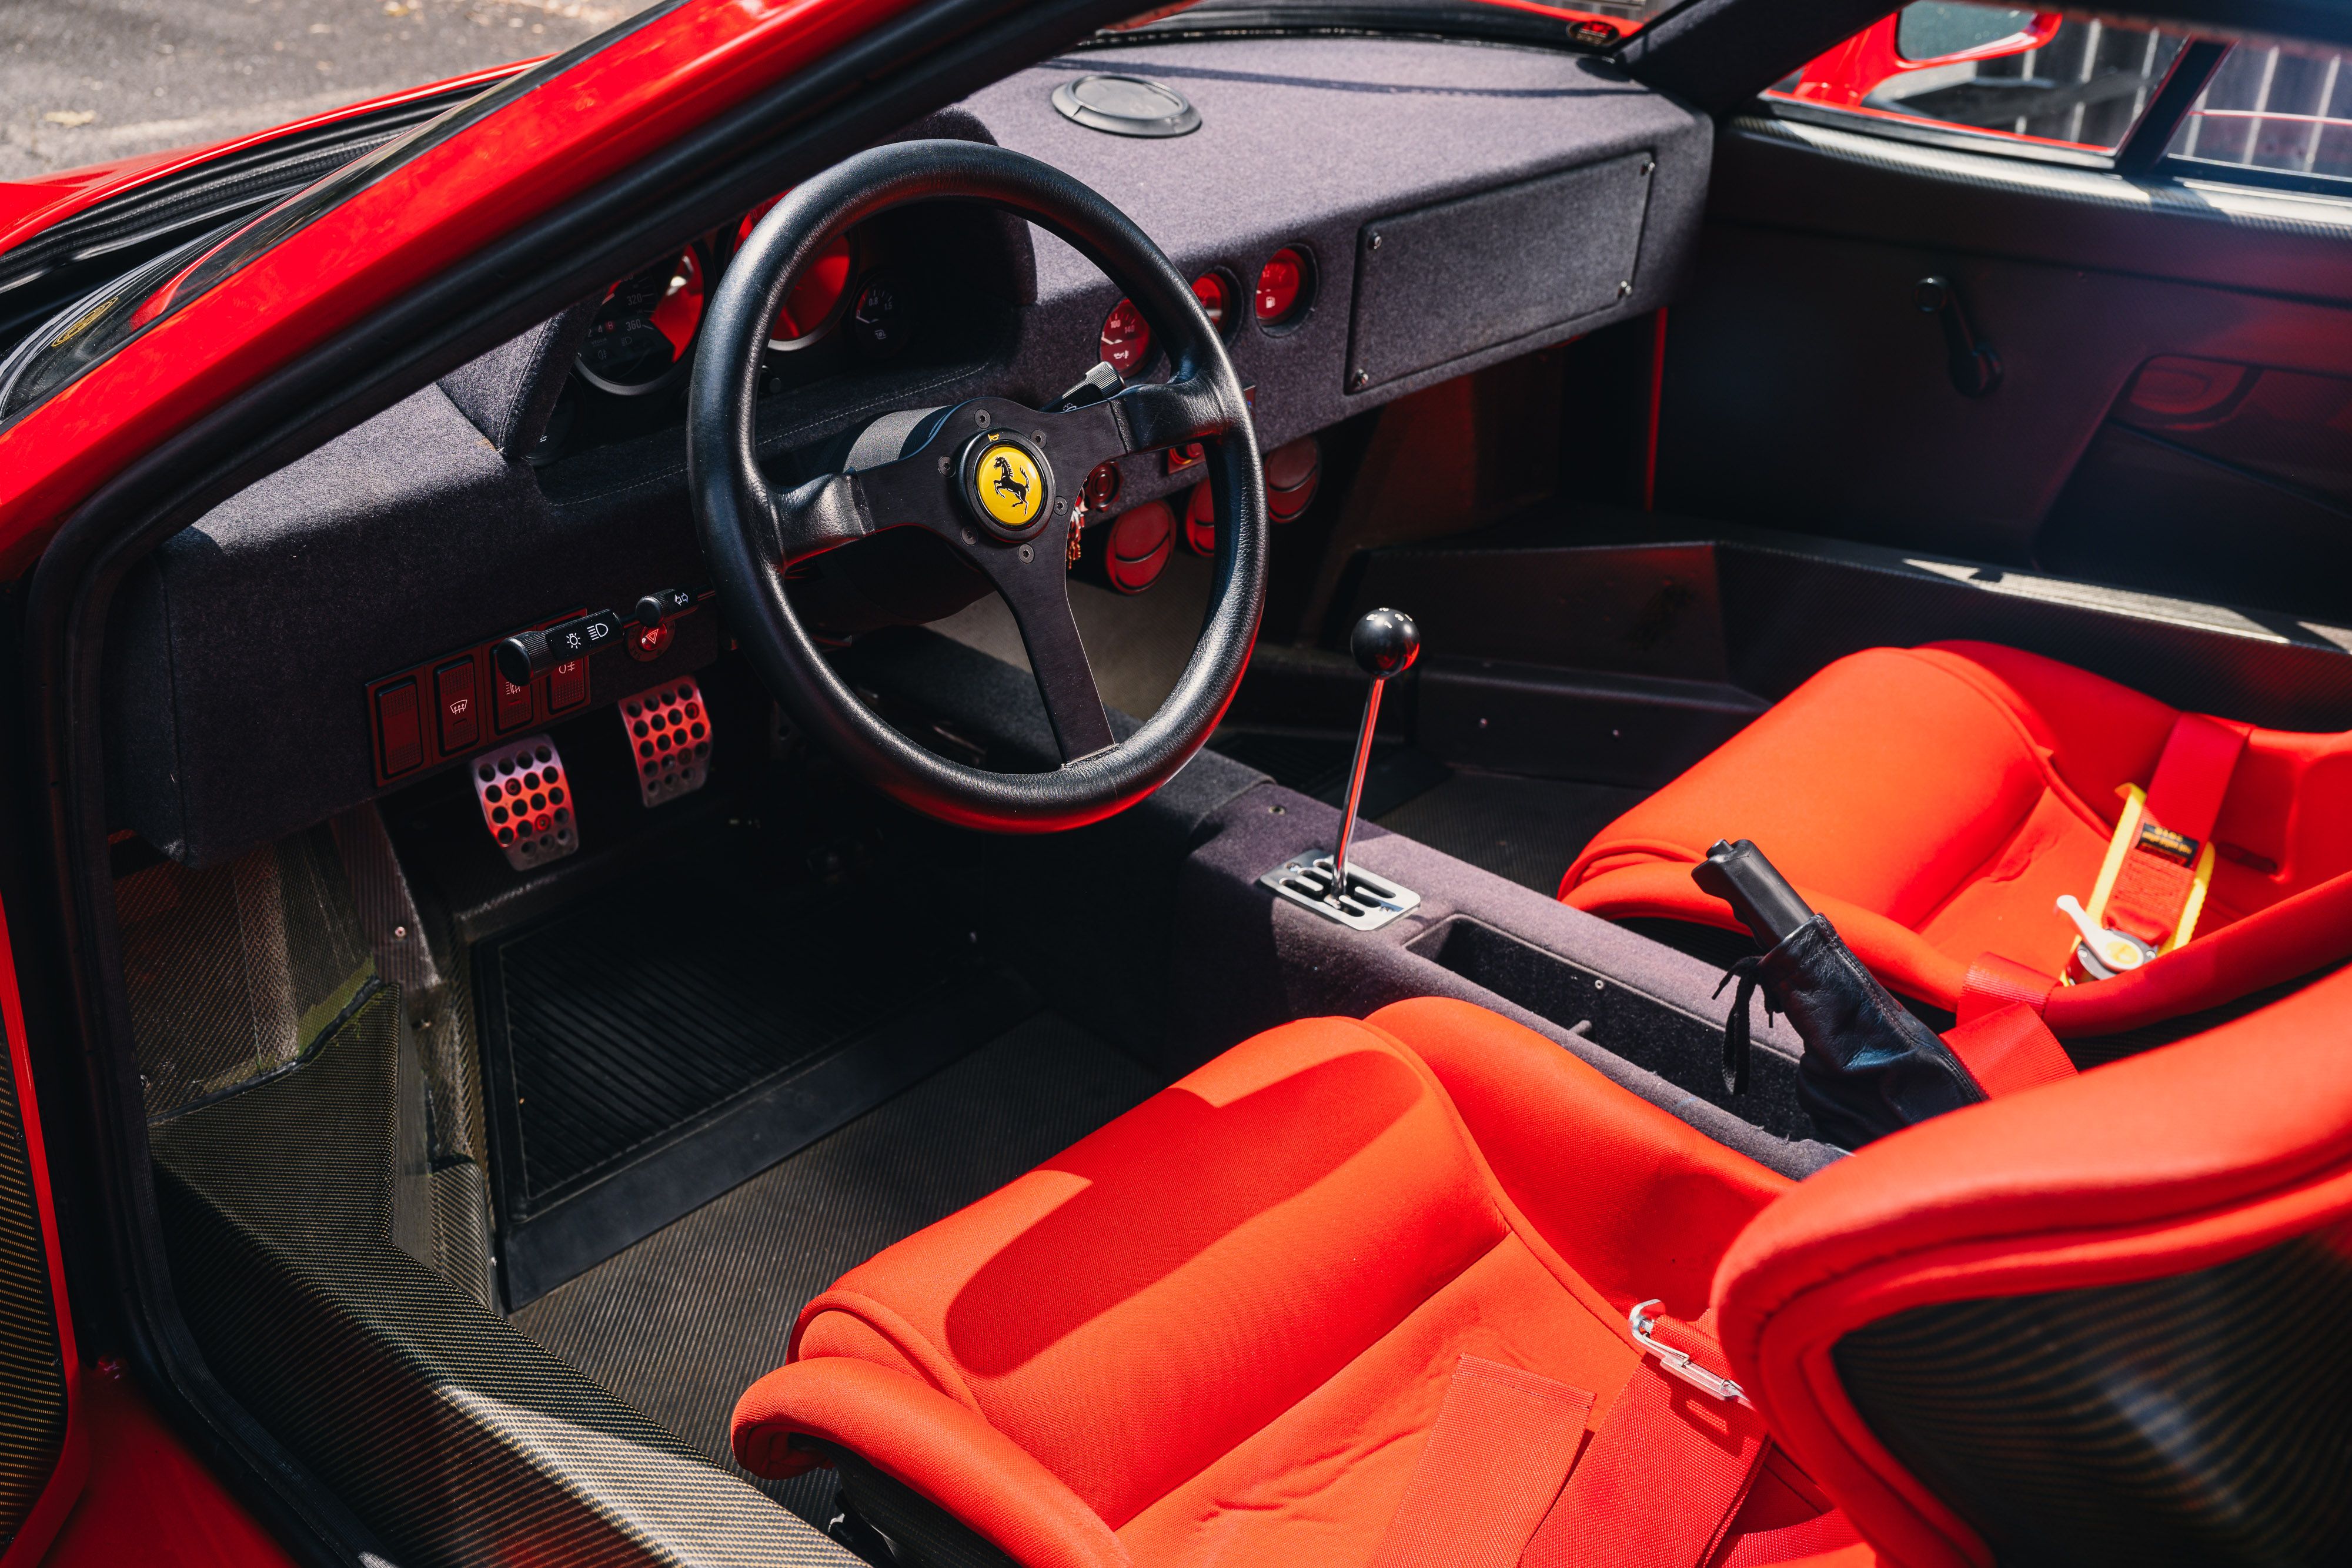 Tested: 1991 Ferrari F40 Feasts on the Timid